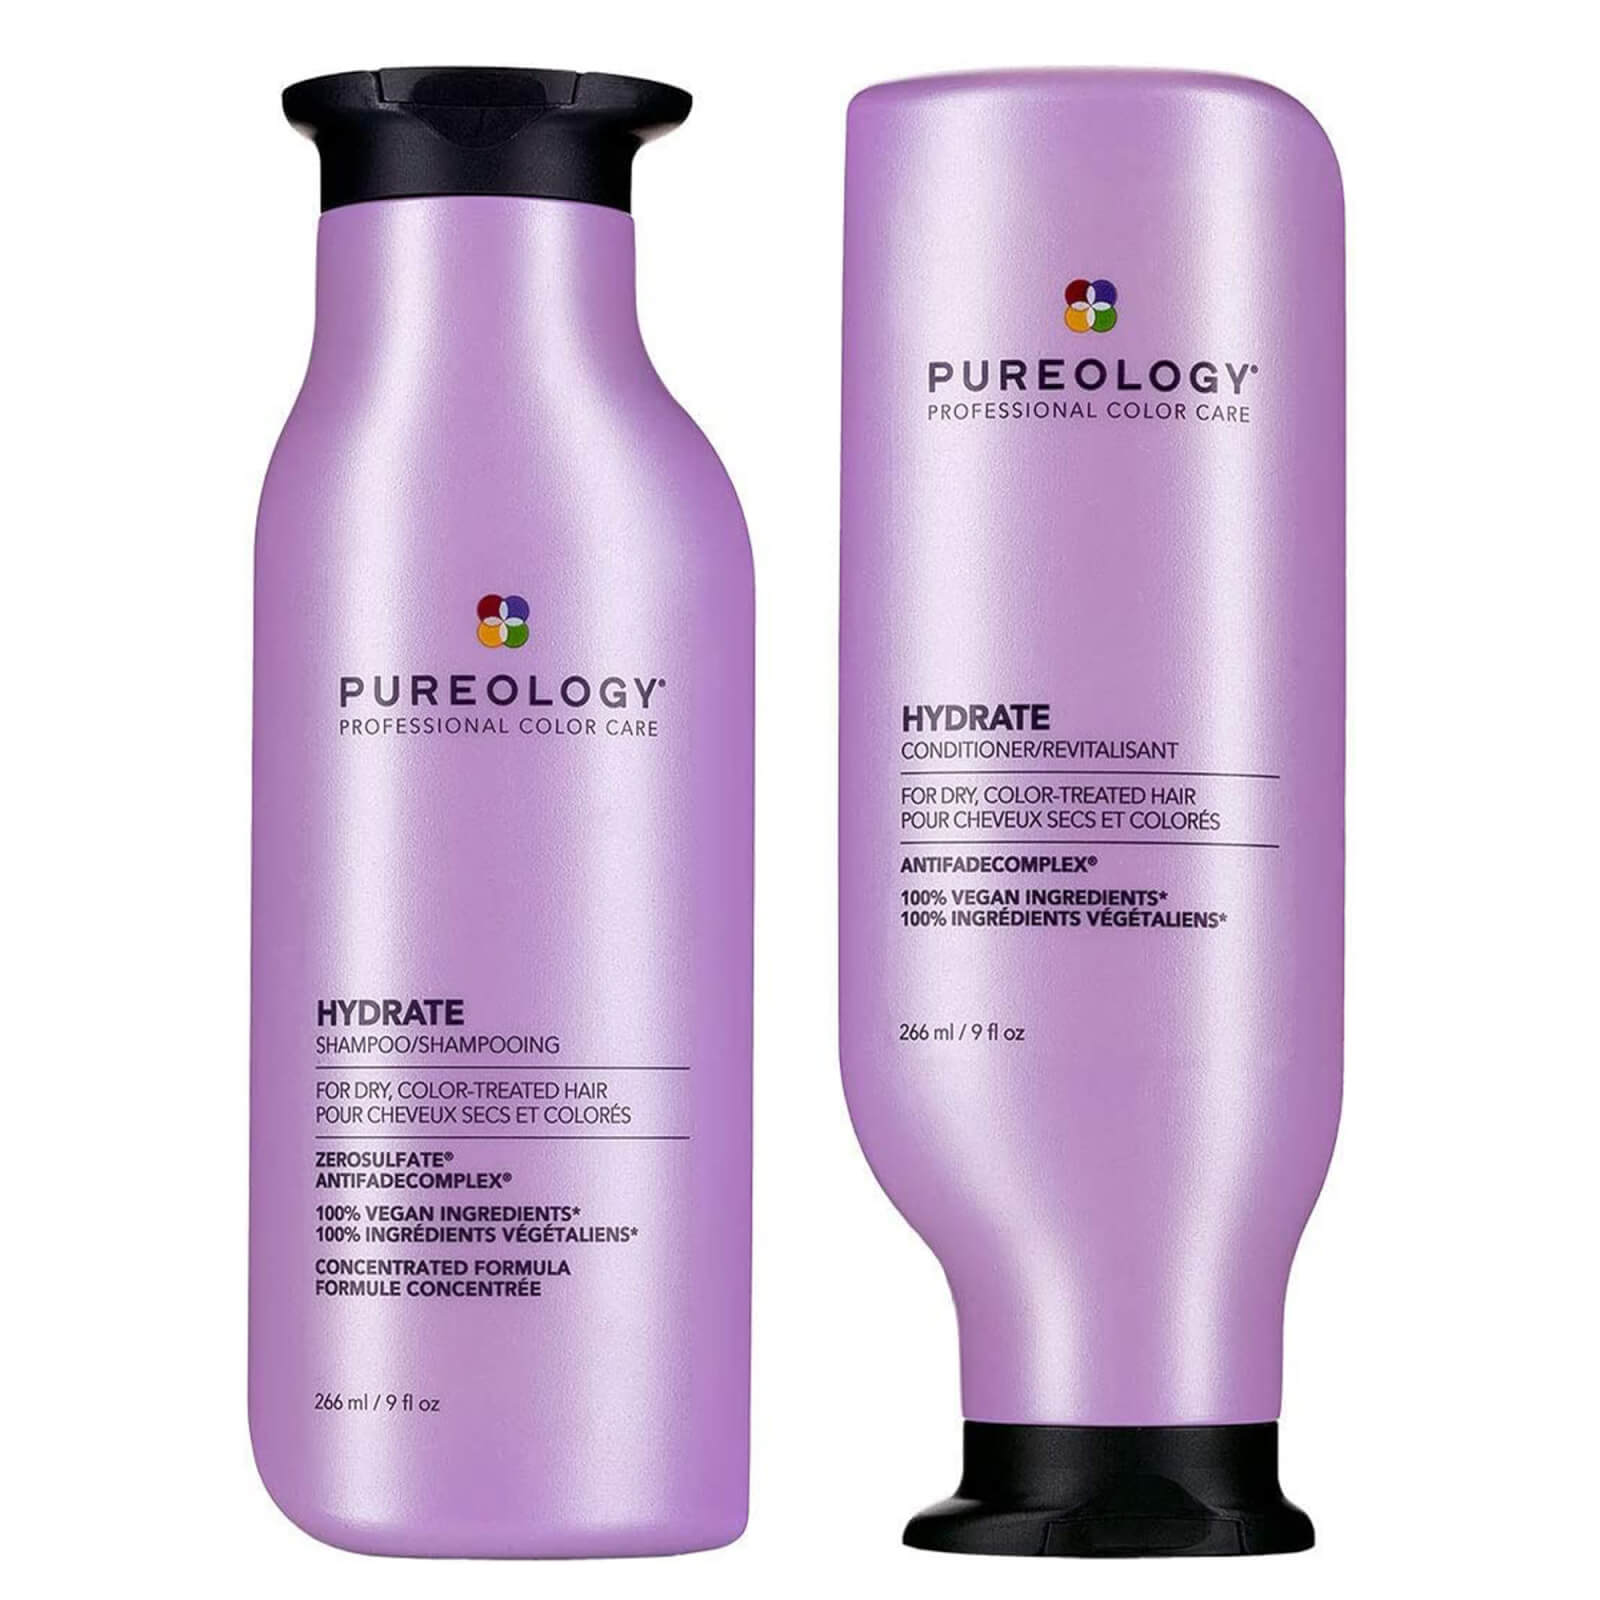 pureology hydrate shampoo and conditioner moisturising bundle for dry hair, sulphate free for a gentle cleanse uomo